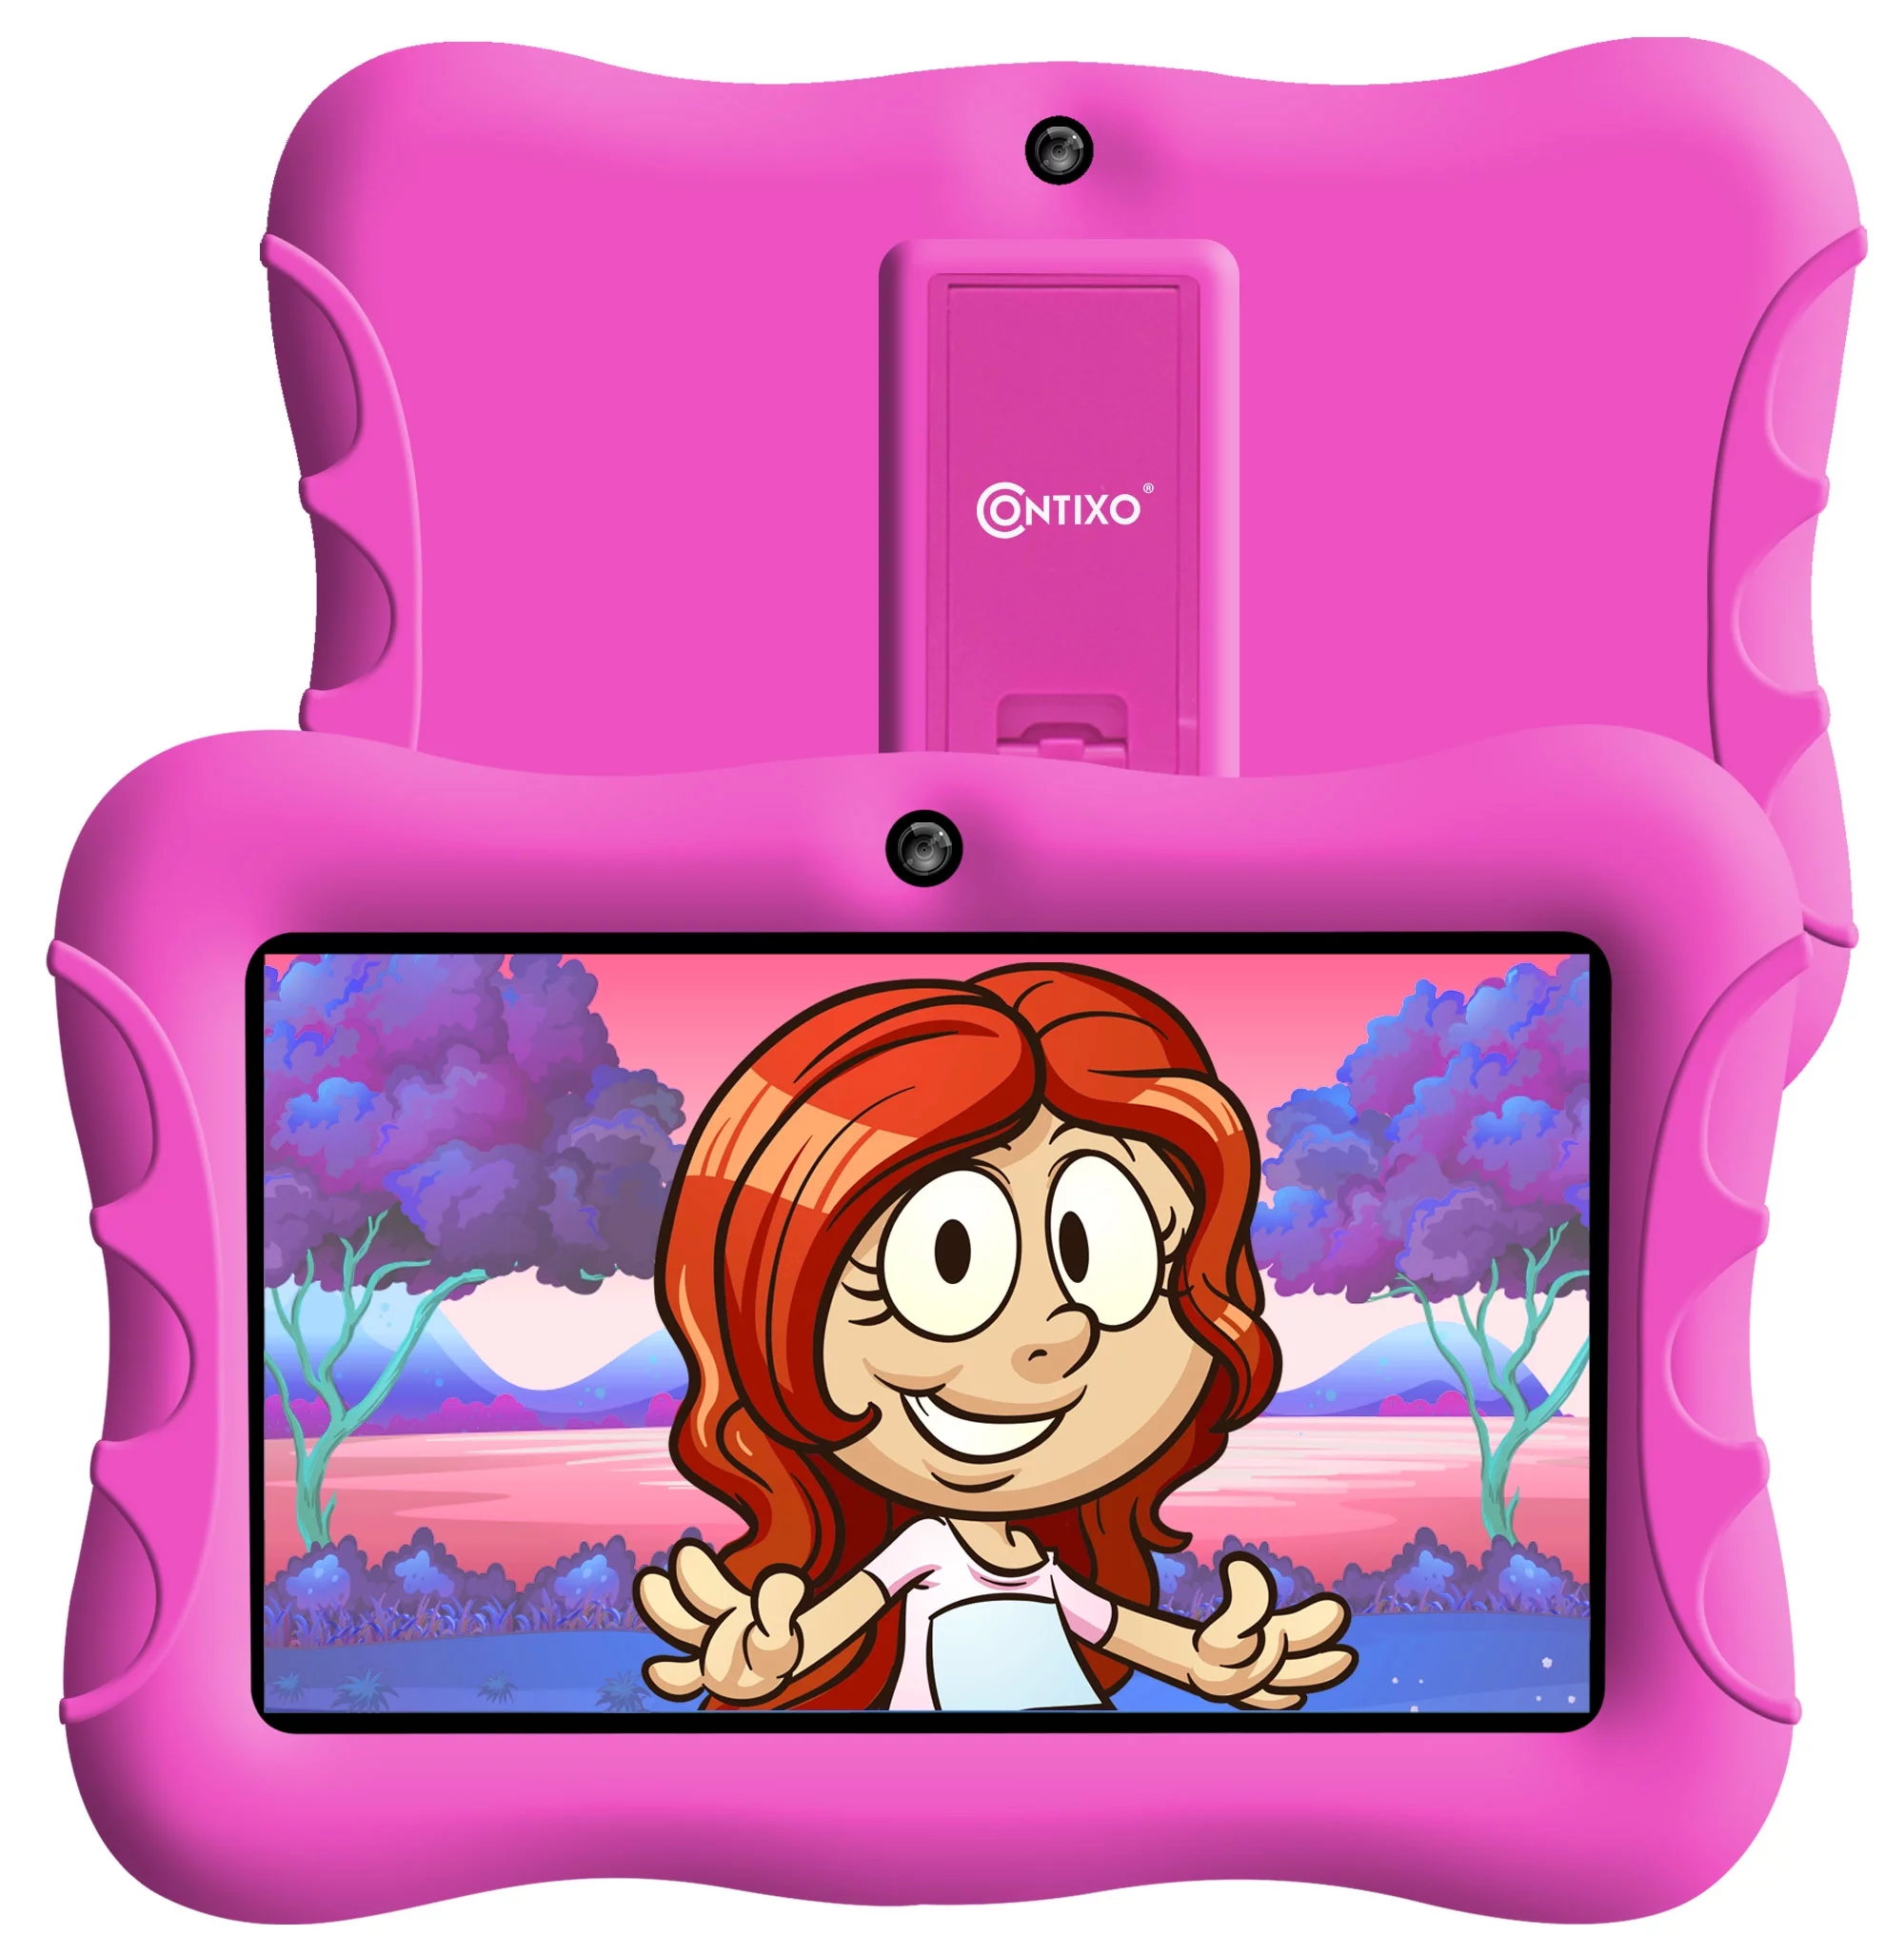 Contixo Kids Tablet with over $150 value of pre-installed Teacher Approved Apps, Android, 7", 32GB Storage, Learning Tablet with Parental Control, Kid-Proof Protective Case, age 3-8, V9-3-32-Pink